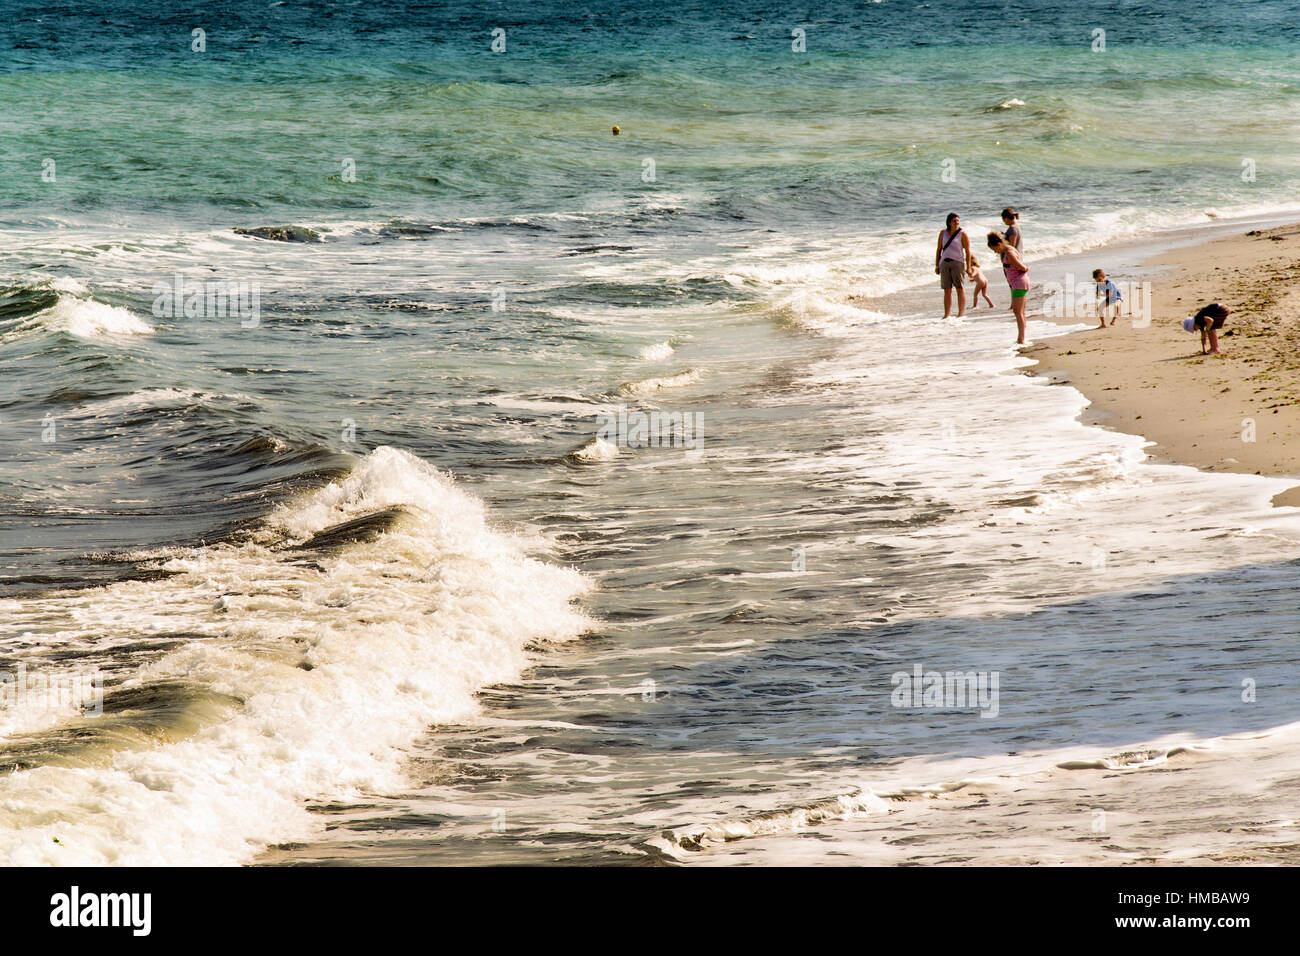 Sunny beach, Bulgaria - calm sea waves and several people enjoying their vacation during the summer Stock Photo